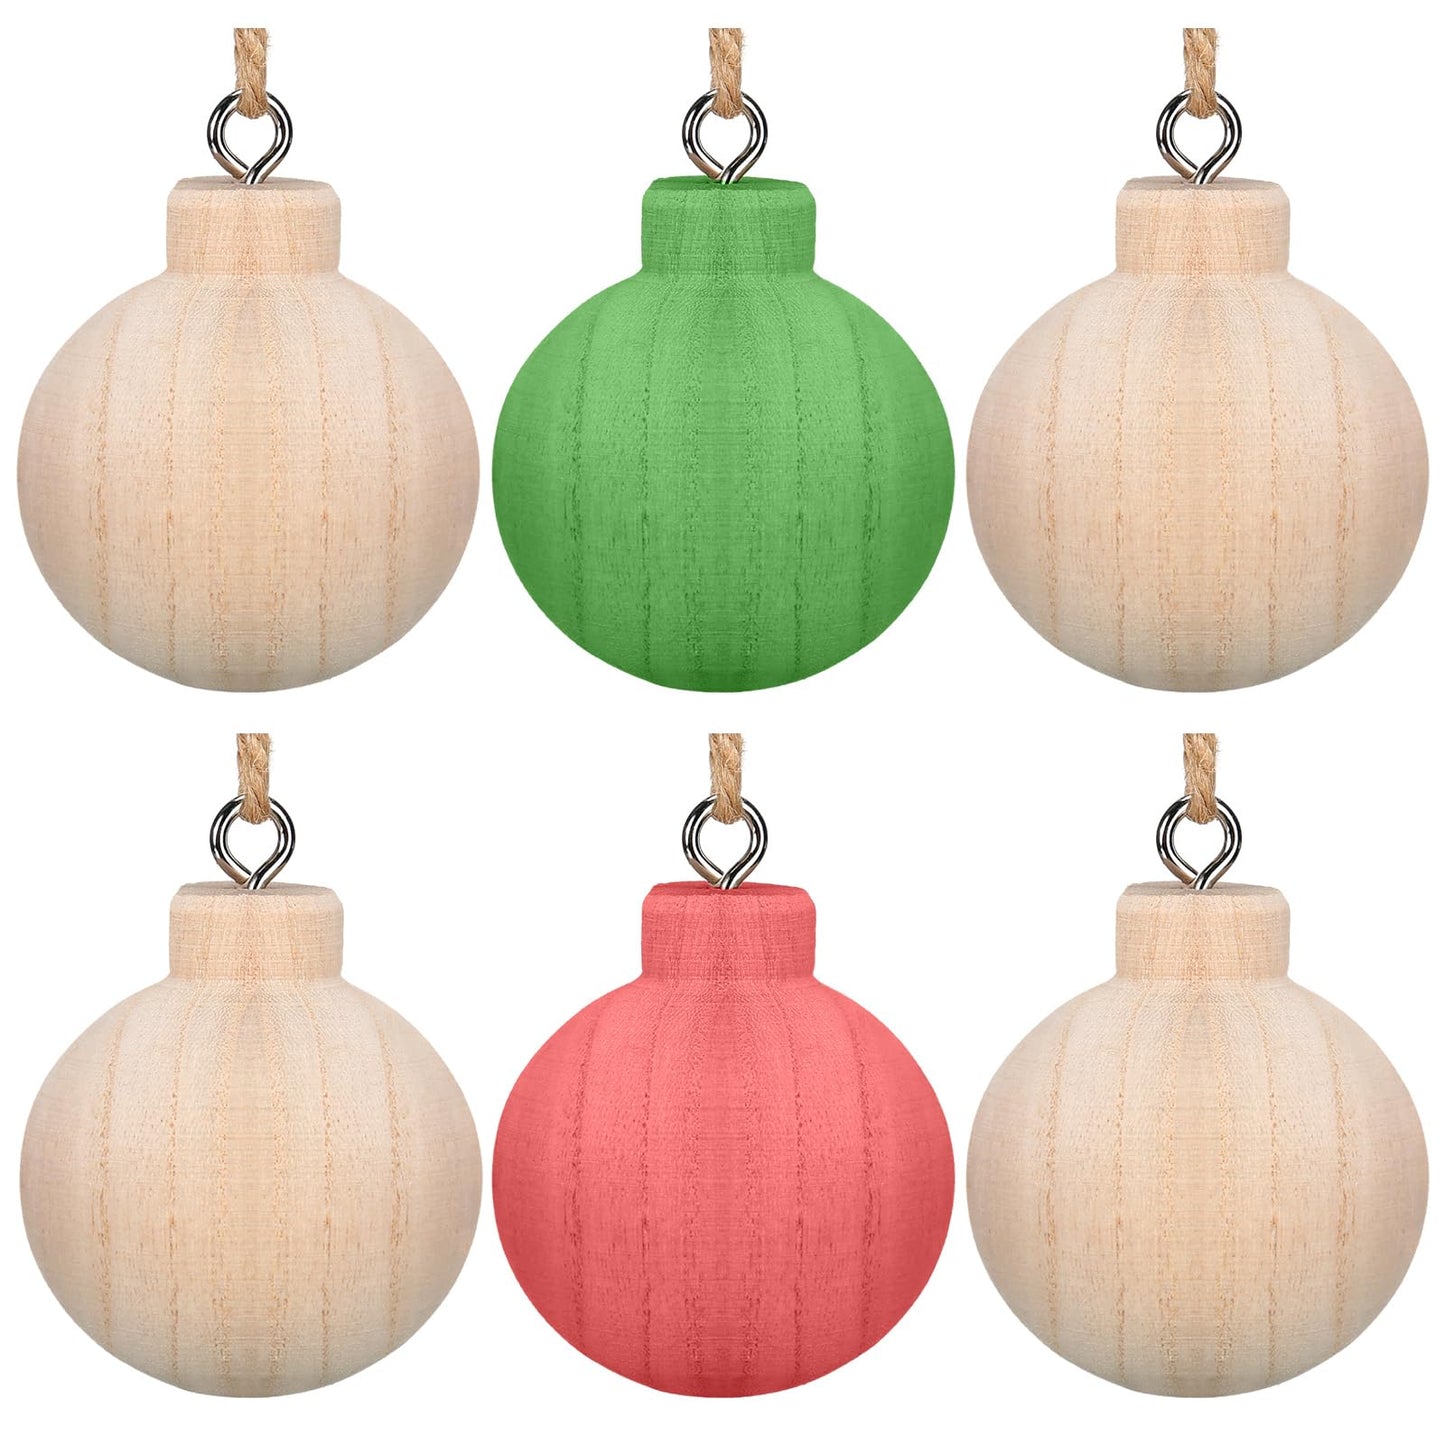 Hiboom 6 Pcs Wood Christmas Ball Unfinished Natural Round 2.6 x 2.4 Paulownia Balls Ornaments for Christmas Trees Crafts Hanging DIY Paint Decor Ball